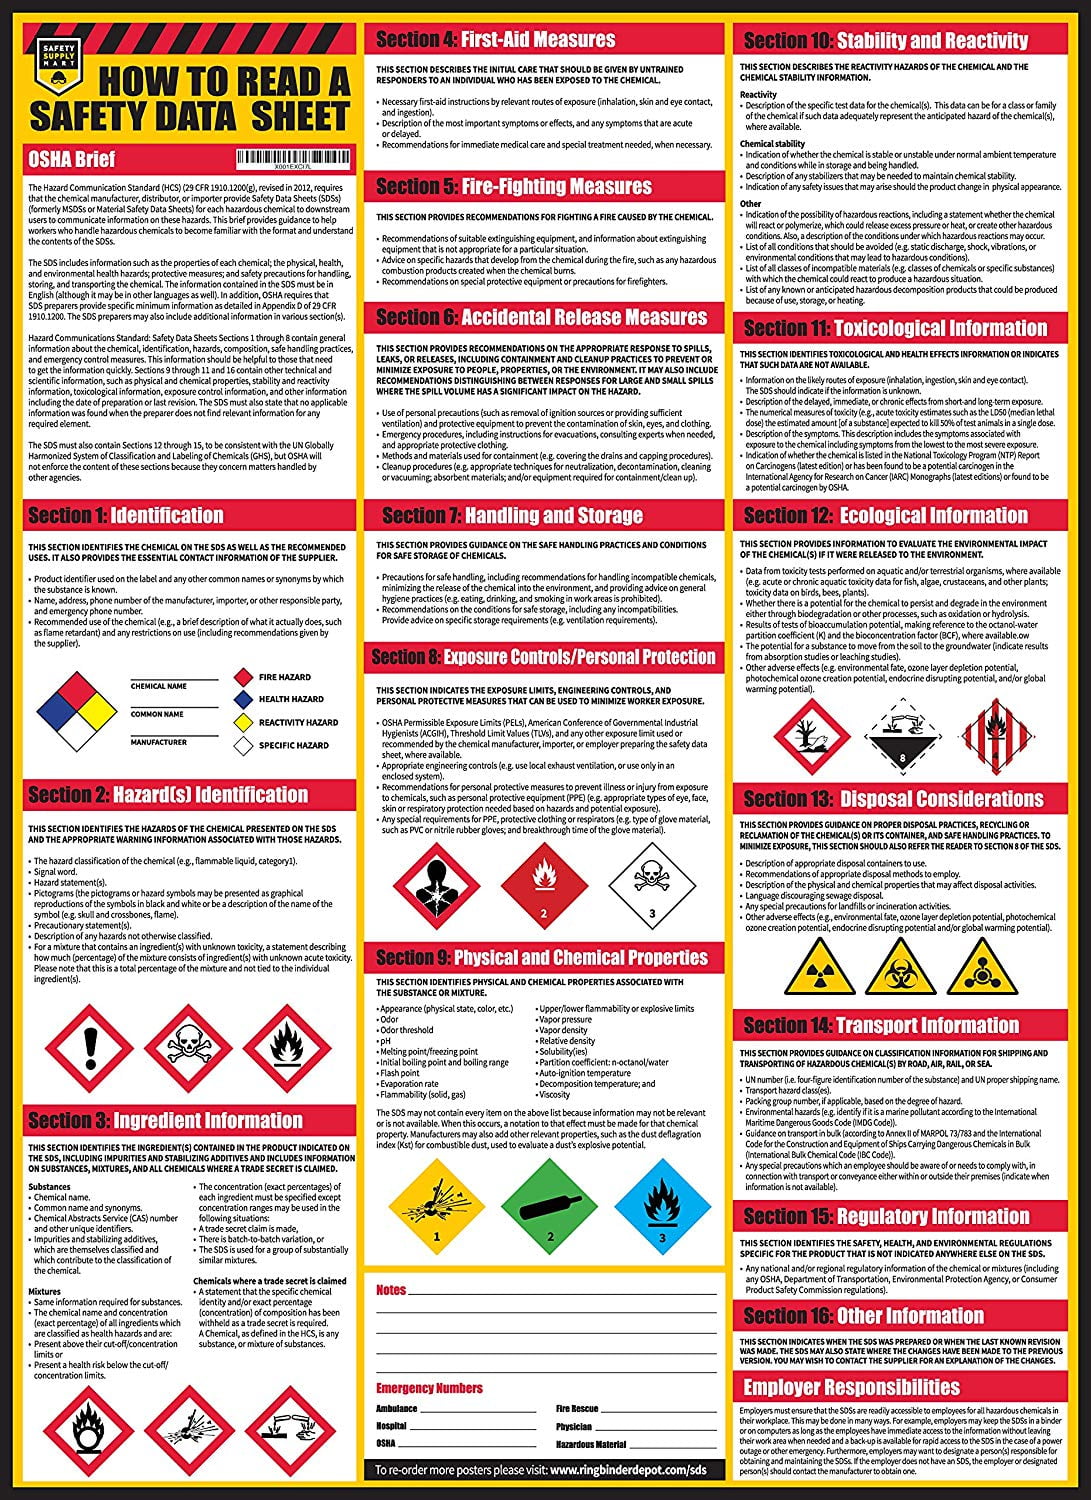 how-to-read-a-safety-data-sheet-sds-msds-poster-24-x-33-inch-uv